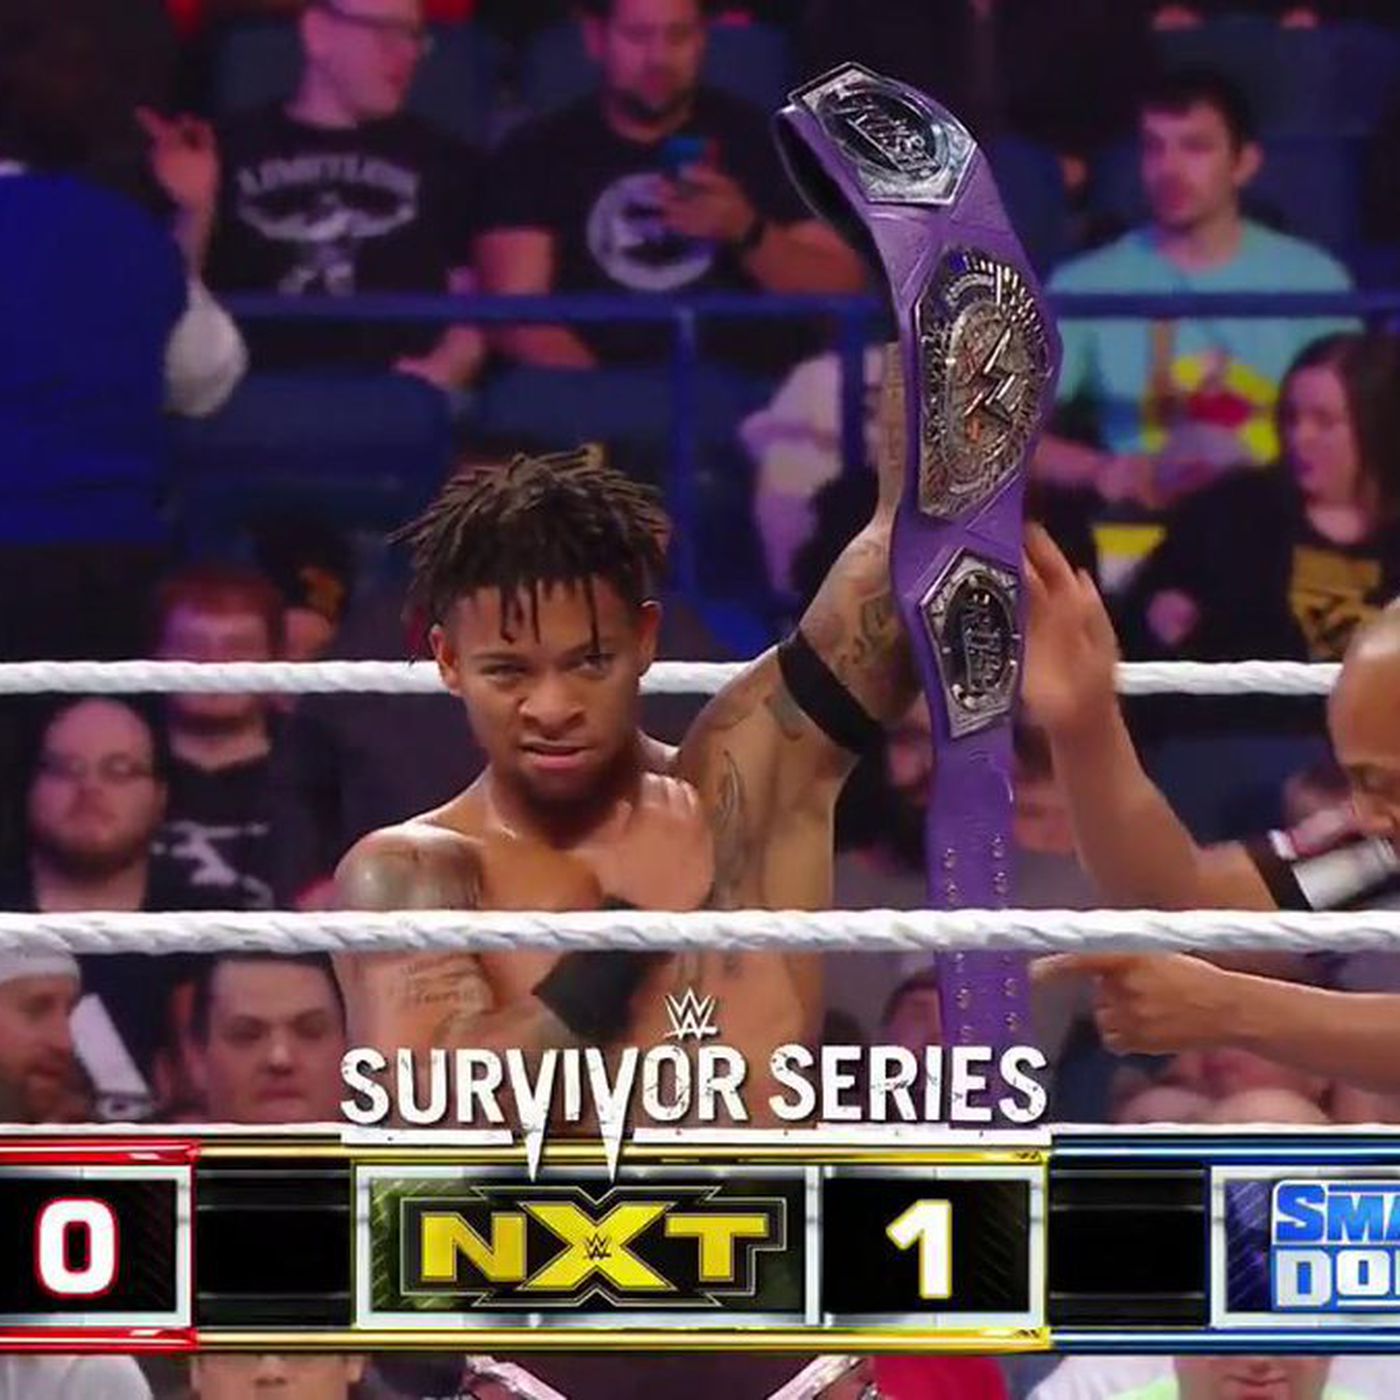 WWE Survivor Series 2019 results: Lio Rush picks up NXT's first win - Cageside Seats